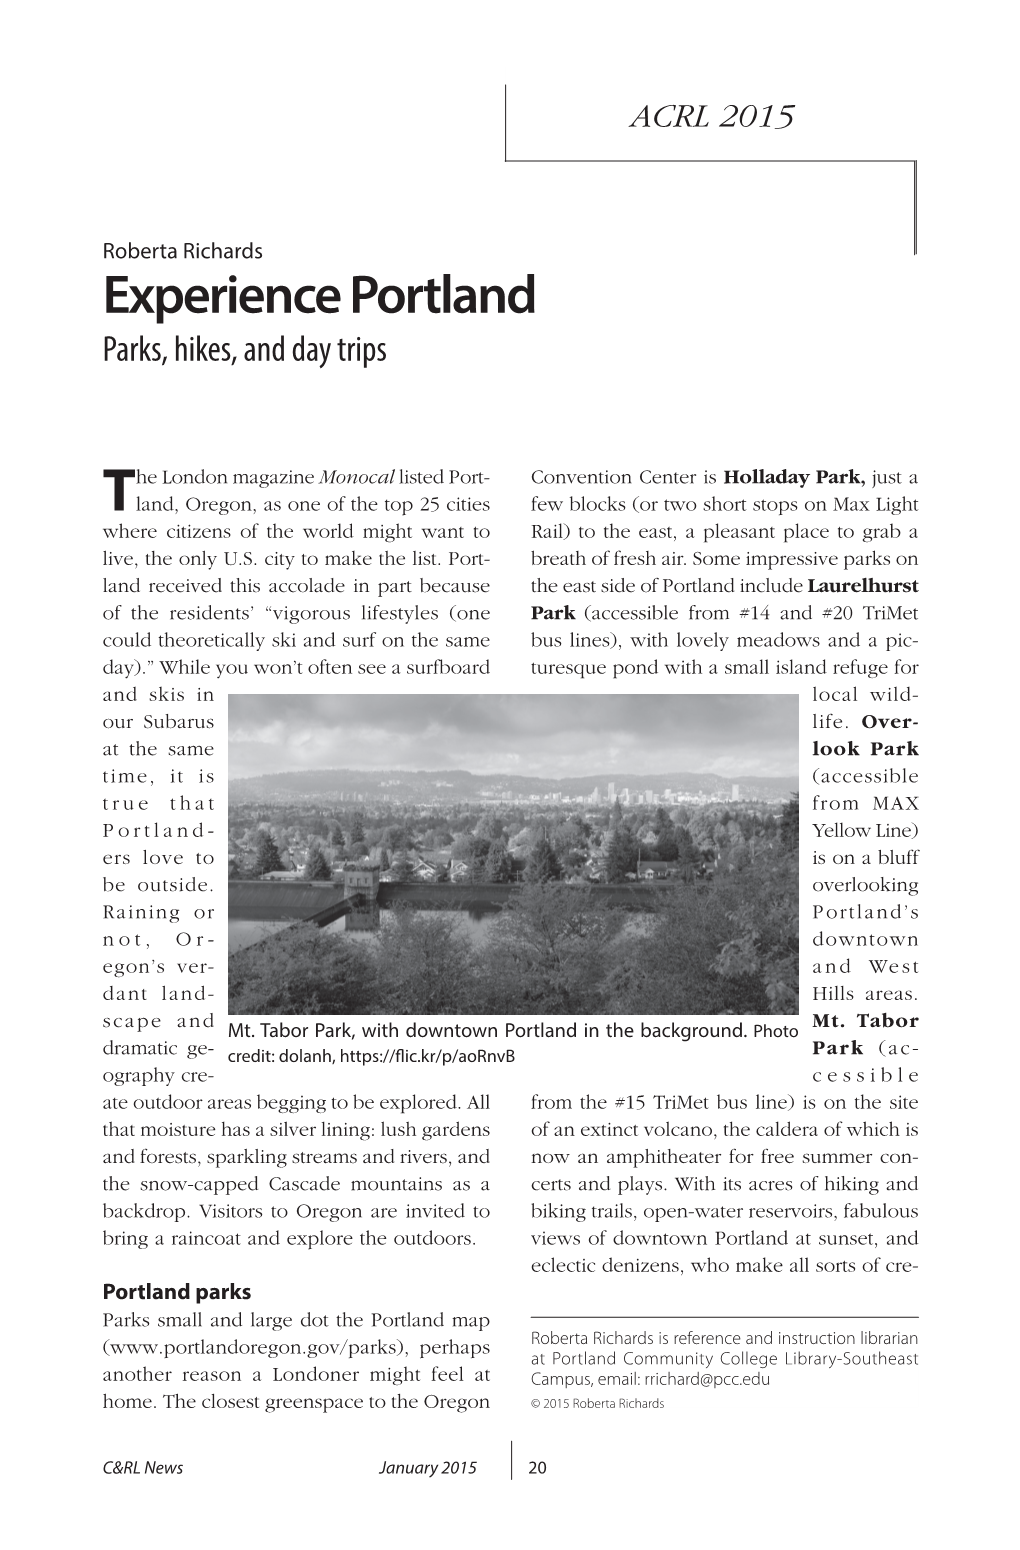 Experience Portland Parks, Hikes, and Day Trips